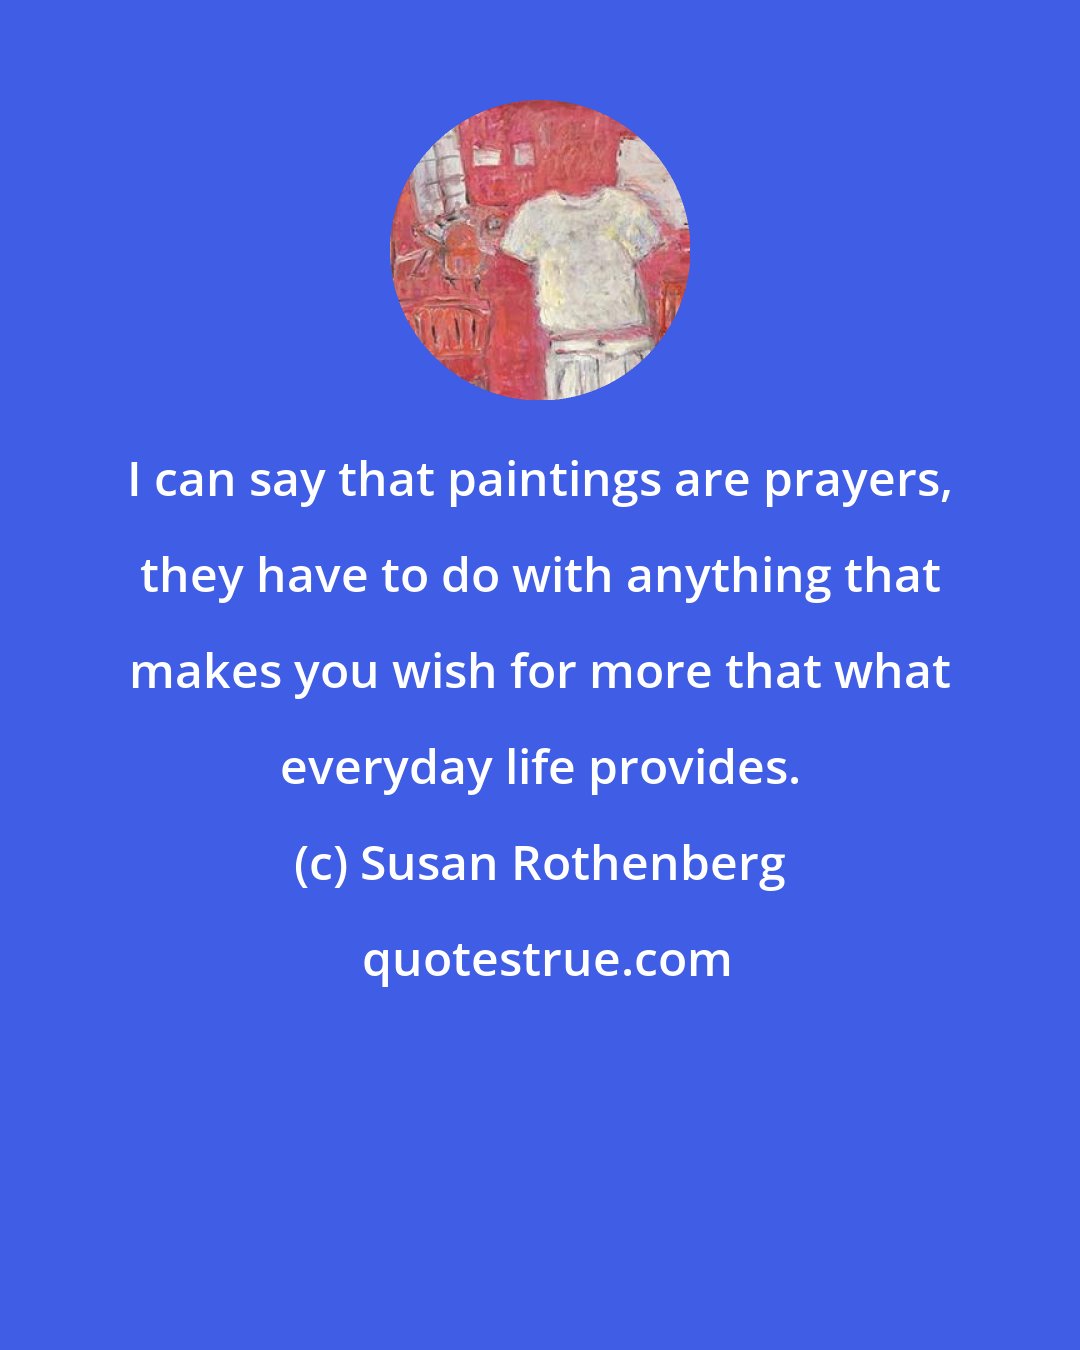 Susan Rothenberg: I can say that paintings are prayers, they have to do with anything that makes you wish for more that what everyday life provides.